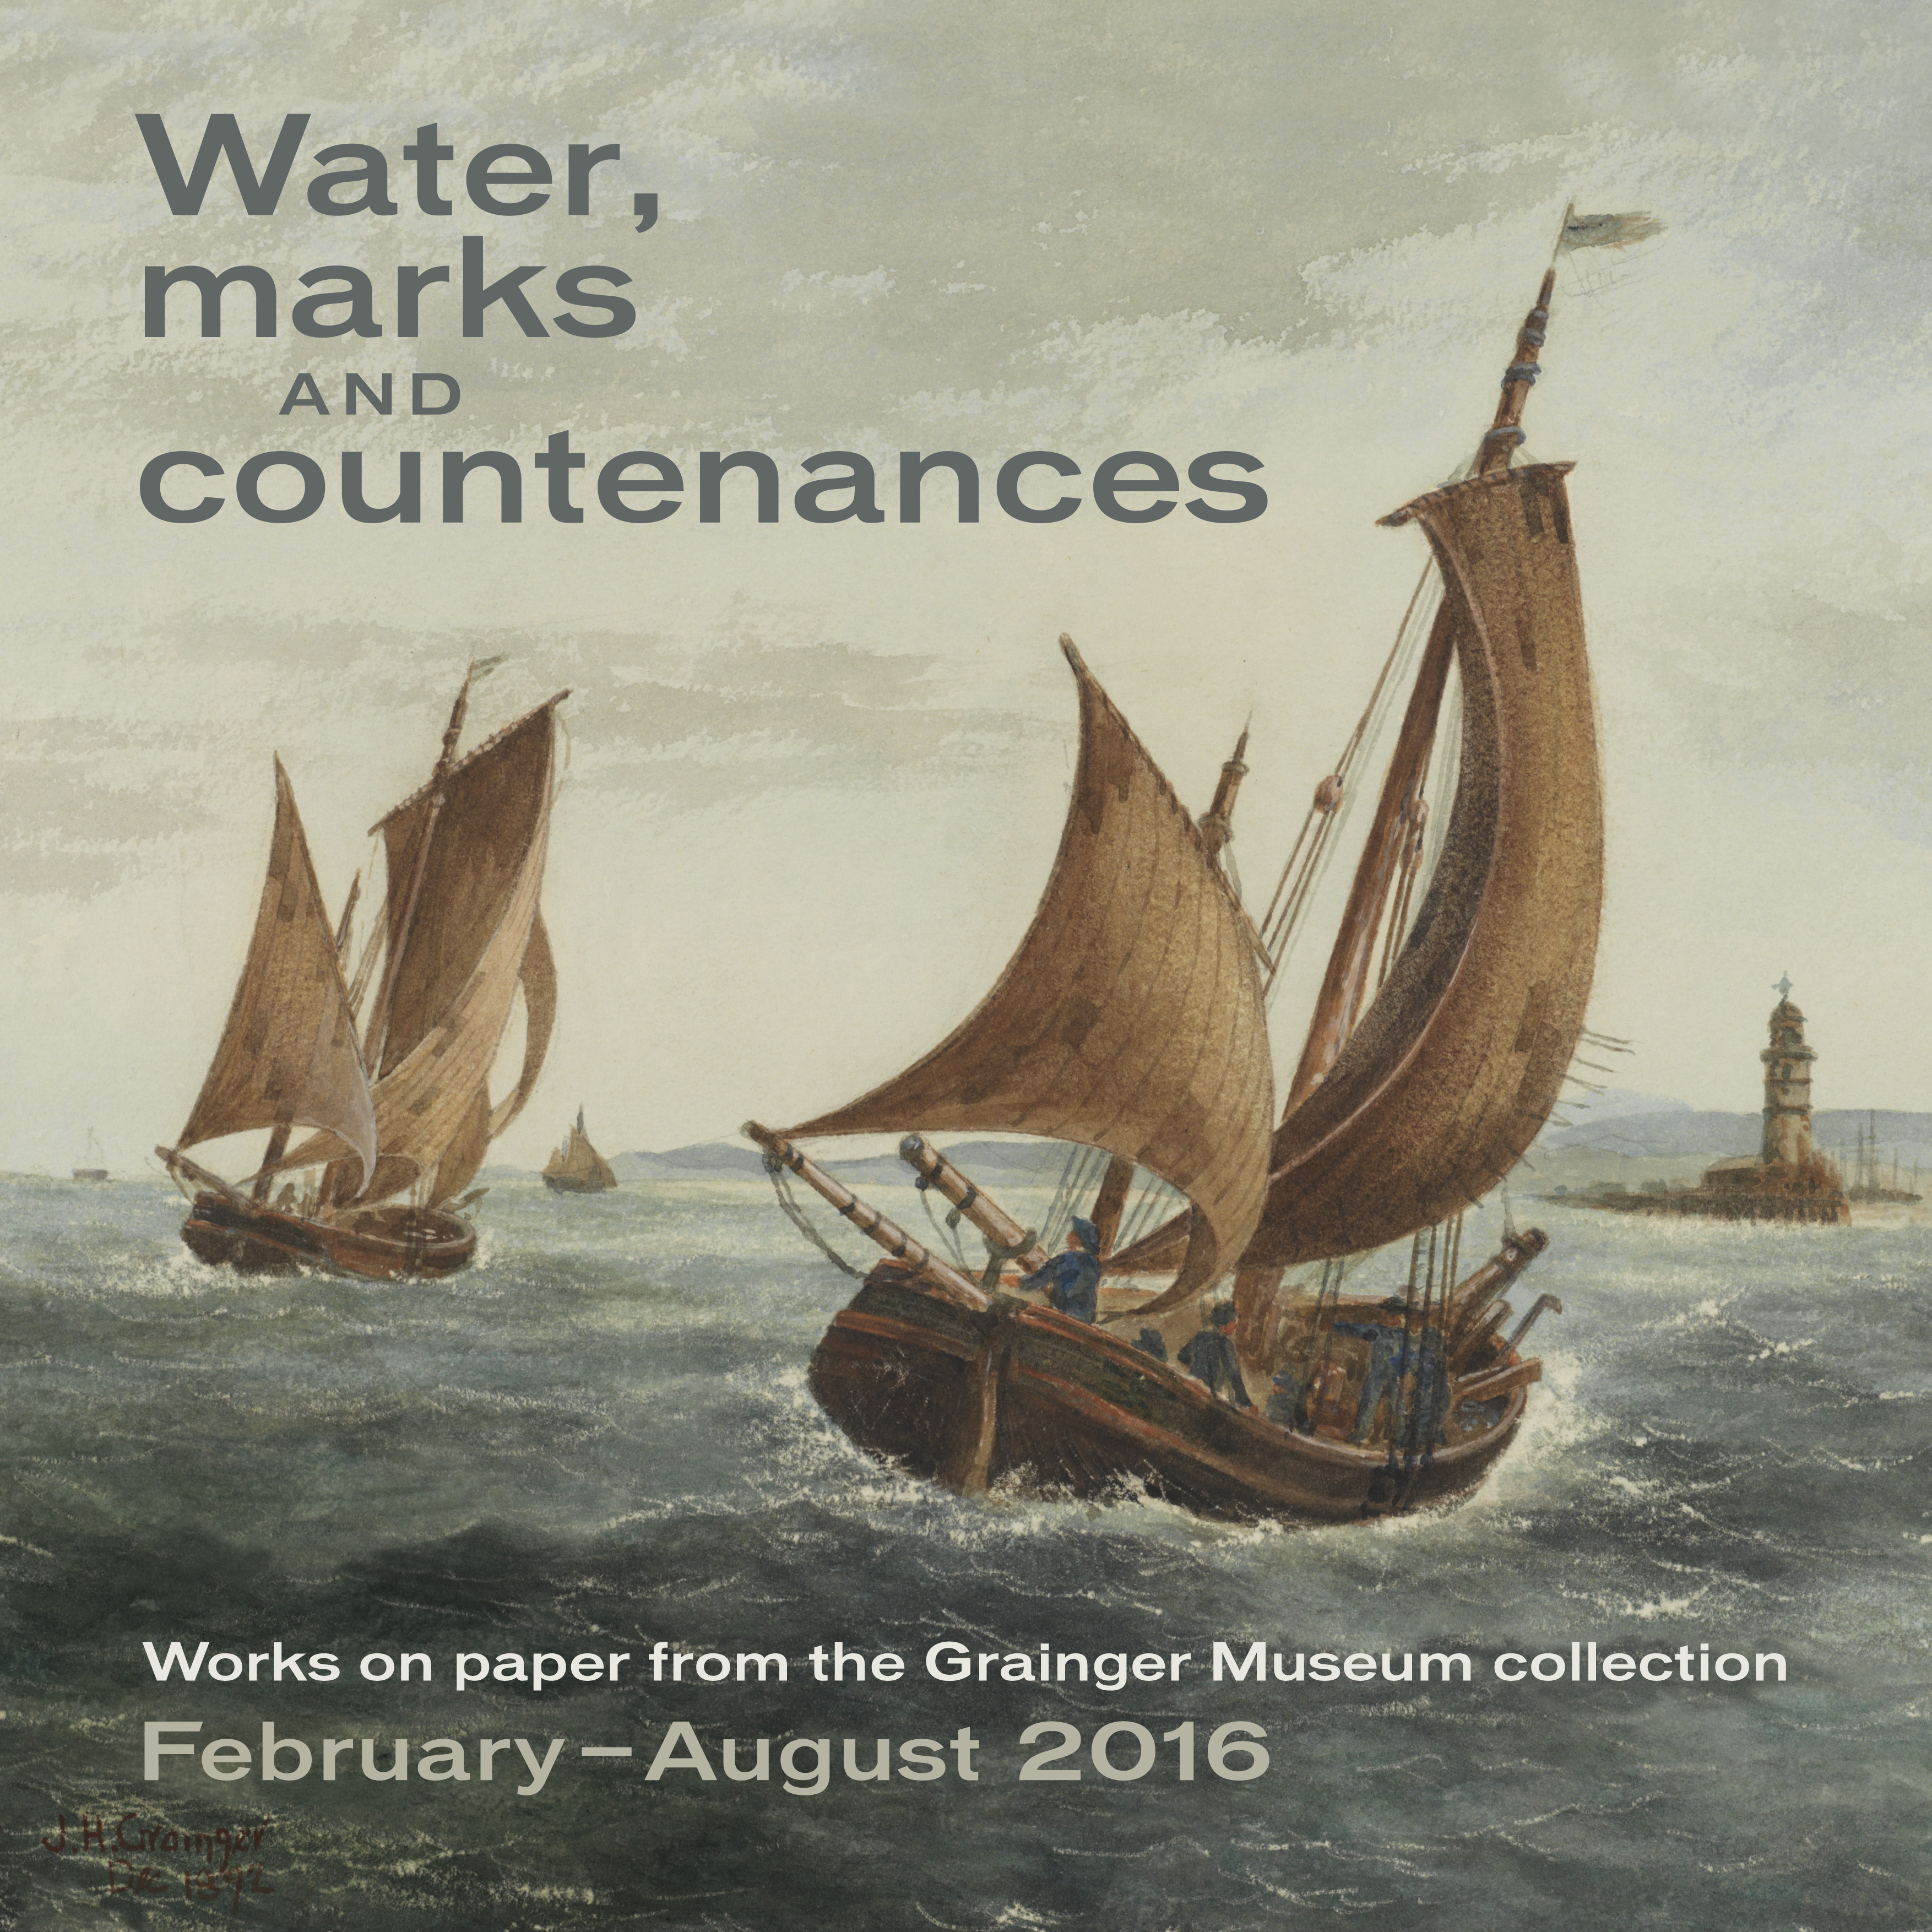 Image for Water, marks and countenances: Works on paper from the Grainger Museum collection